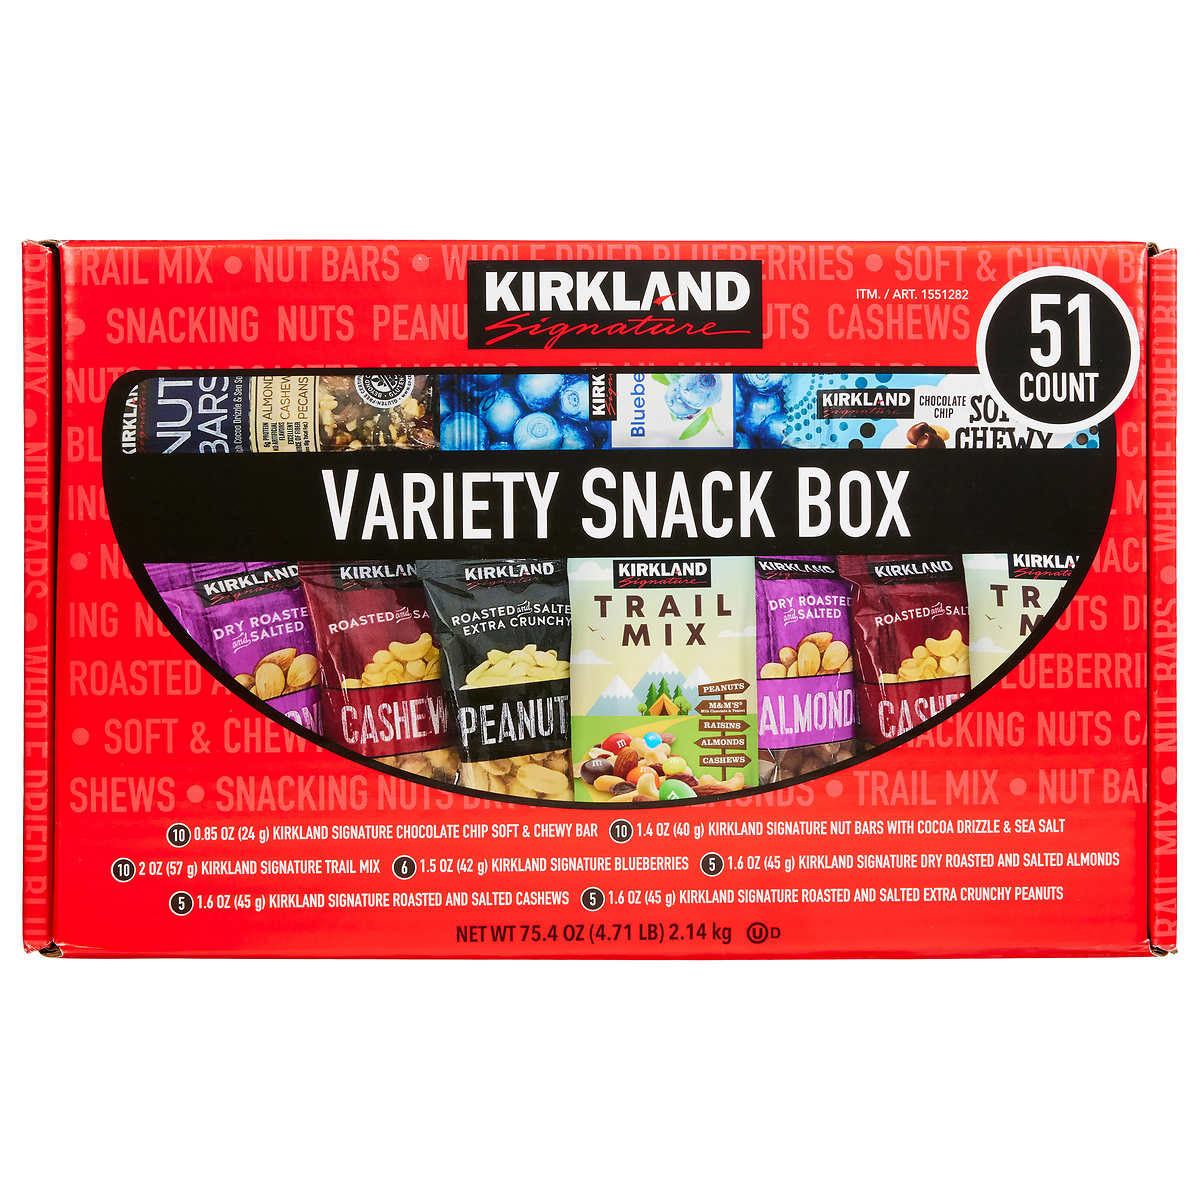 Kirkland Signature Extra Fancy Mixed Nuts, Unsalted, 2.5 lbs